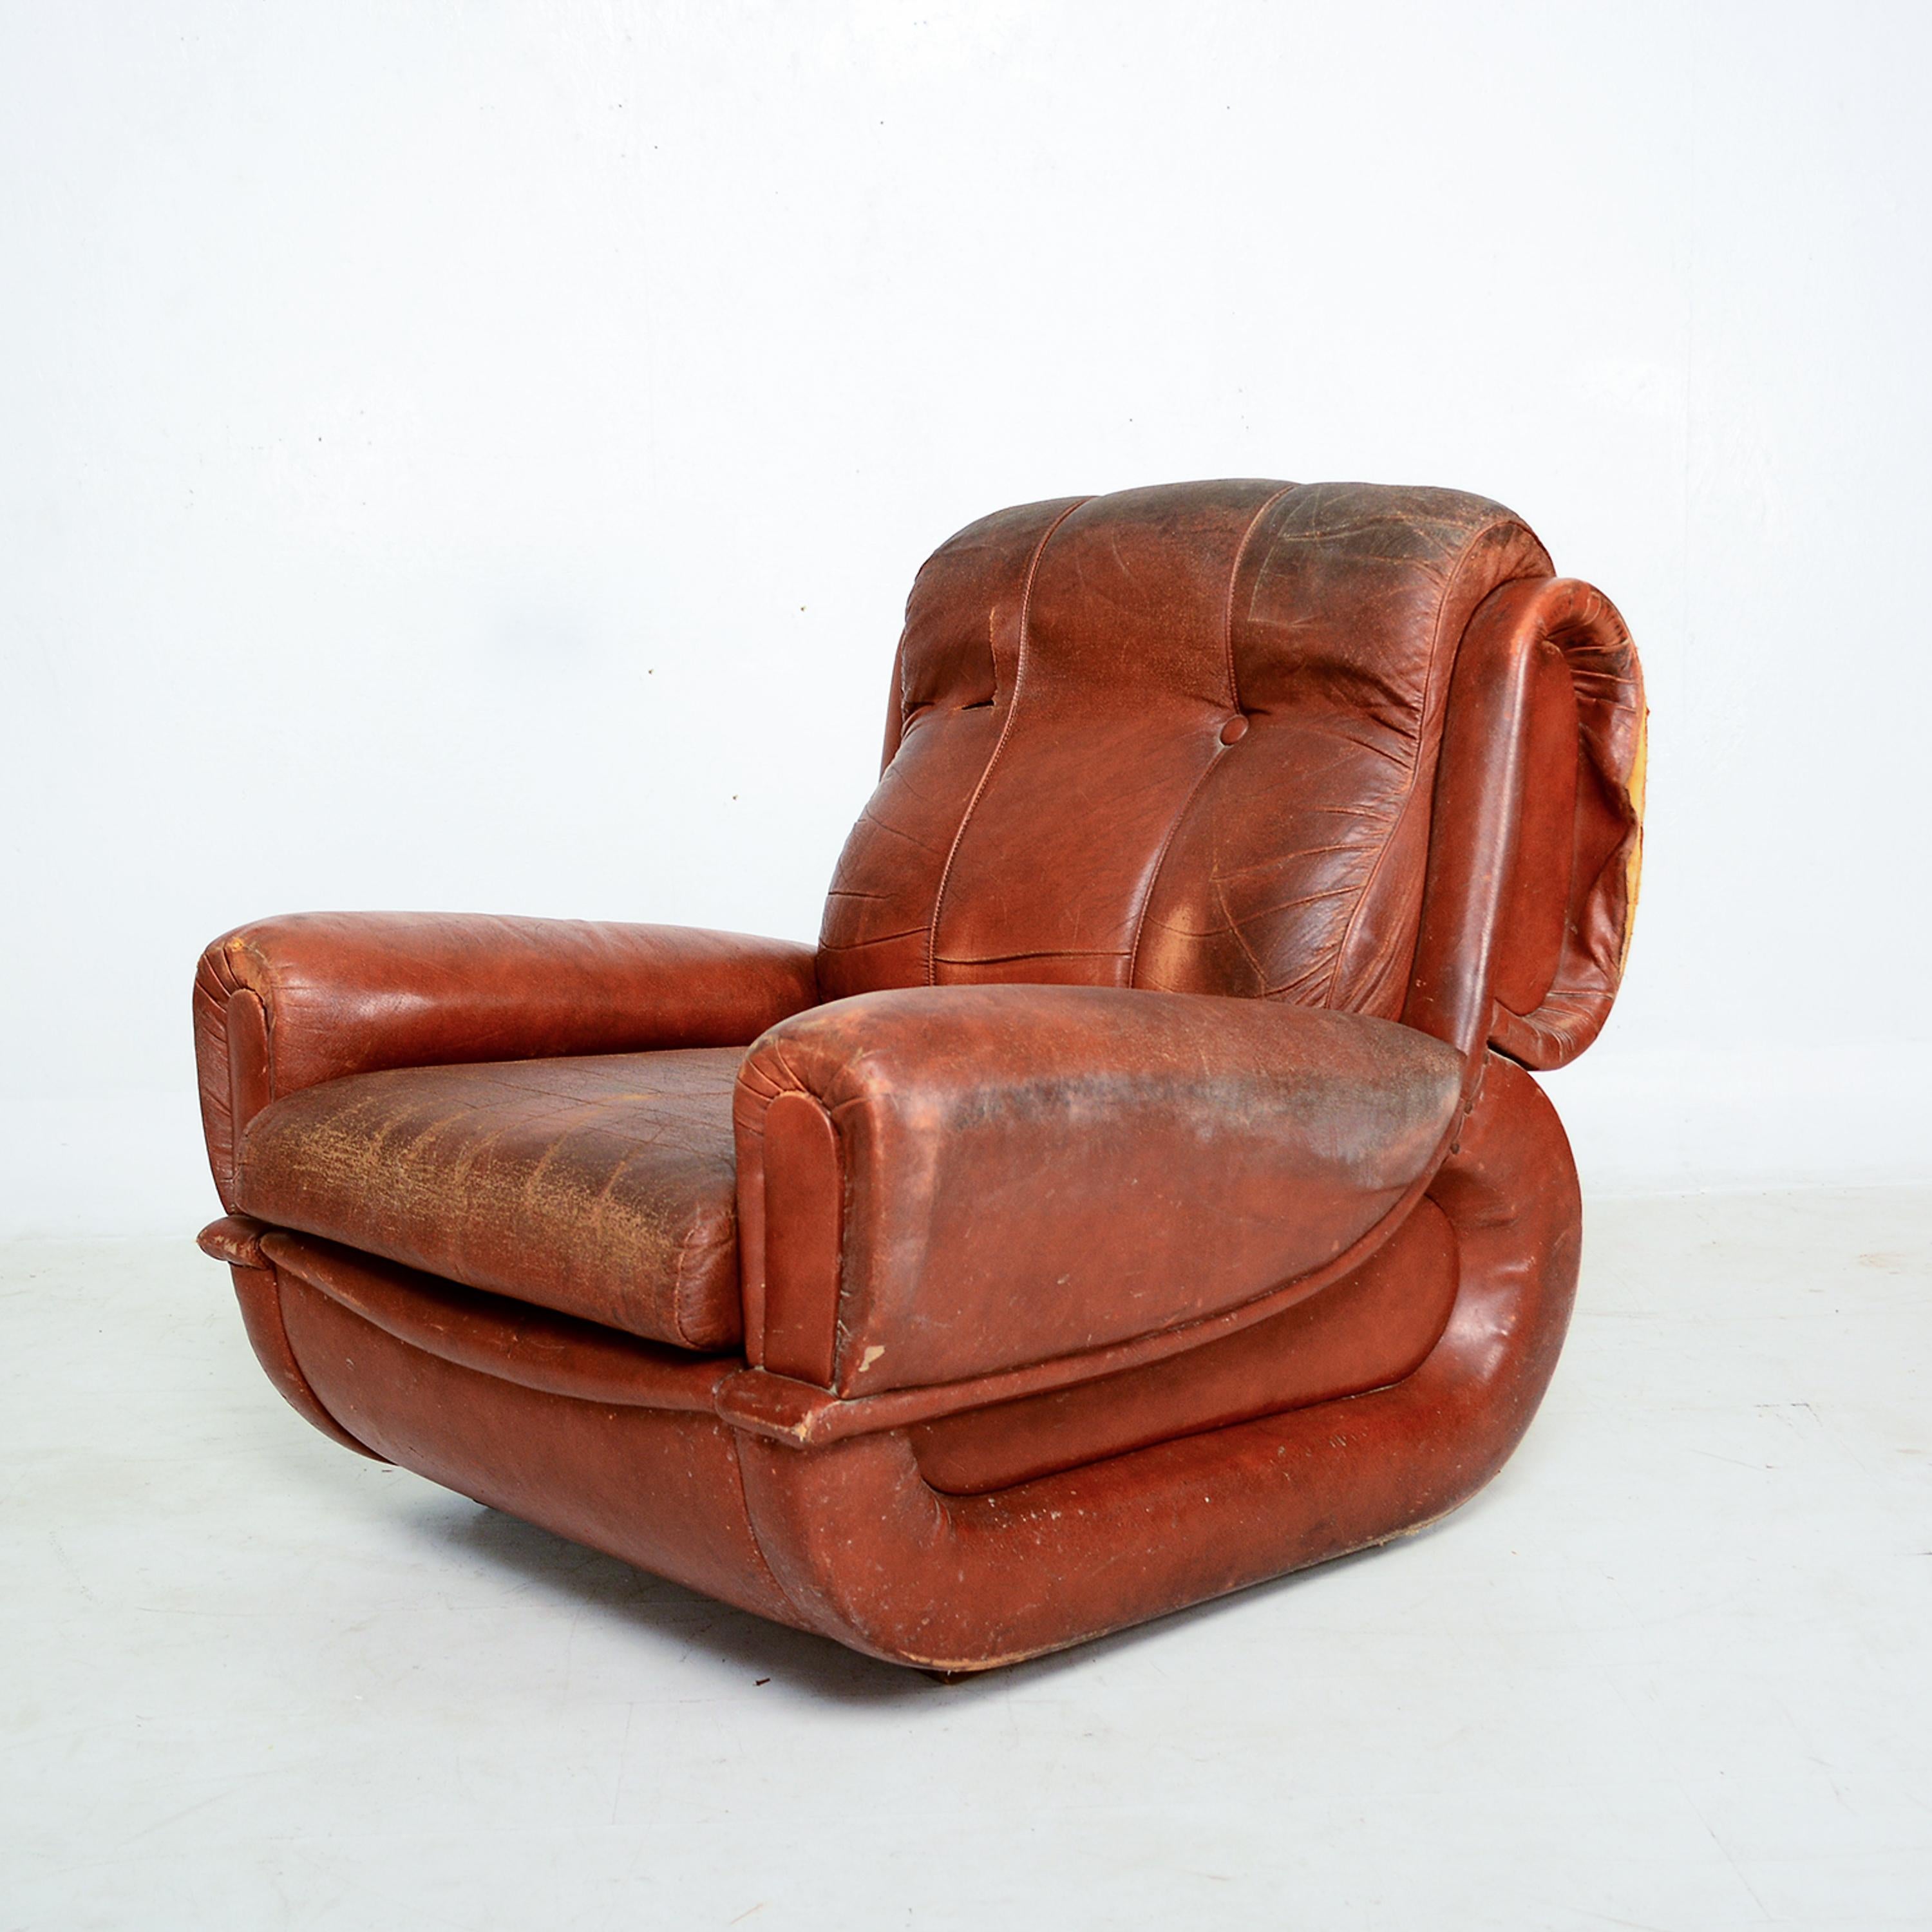 Guiseppe Munari for Poltrona Italian Lounge Chairs Tobacco Leather, Italy 1960s 1